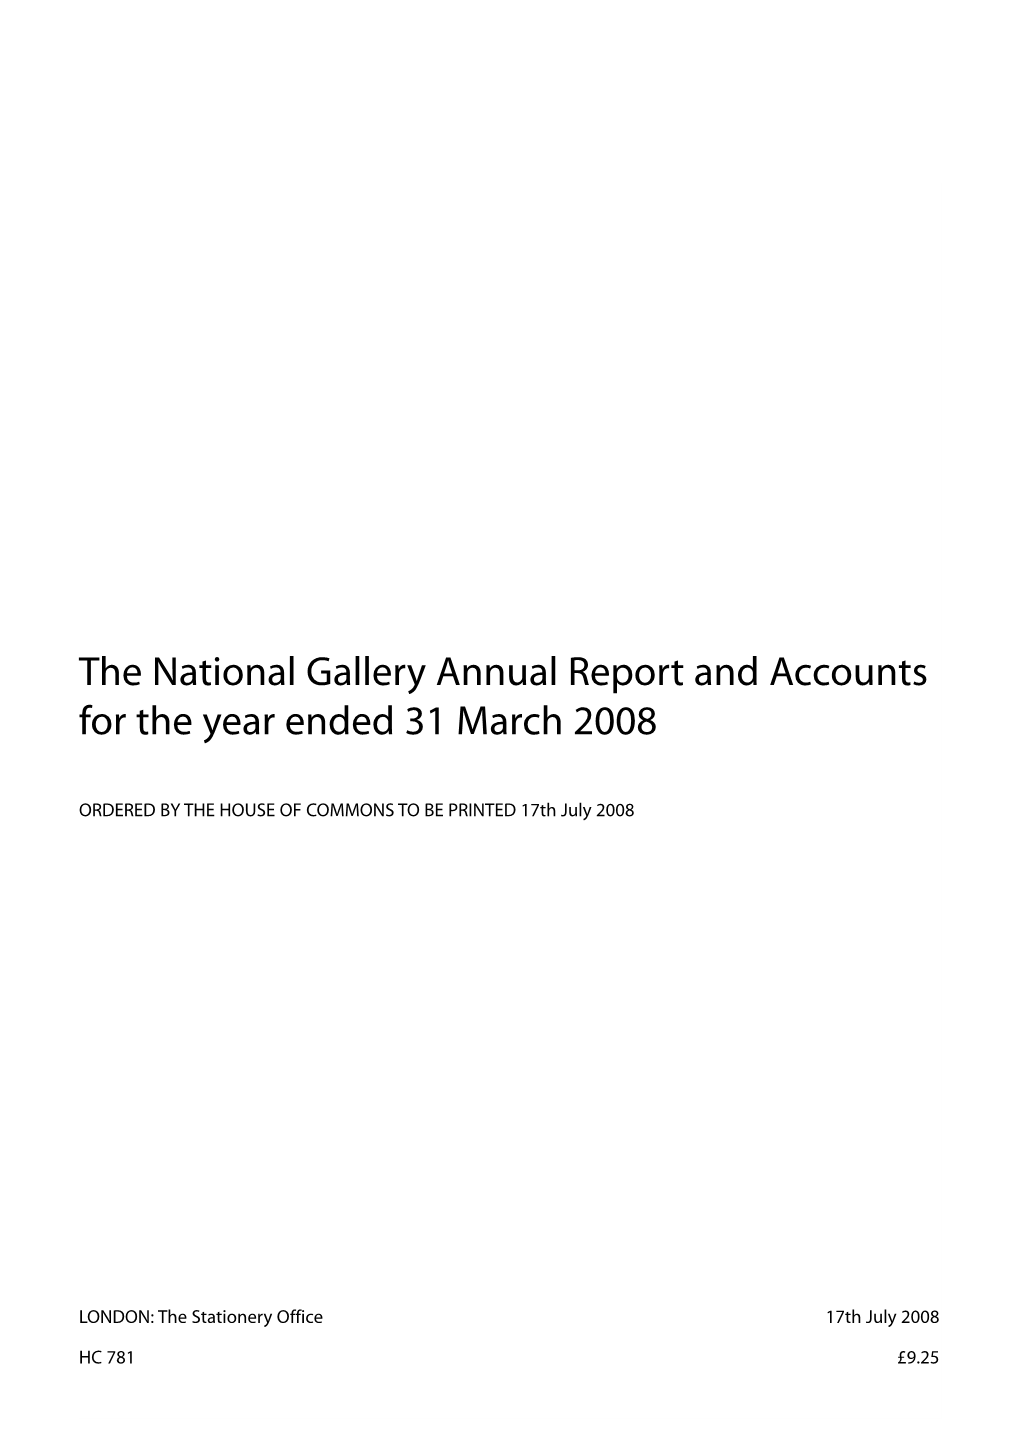 The National Gallery Annual Report and Accounts for the Year Ended 31 March 2008 HC